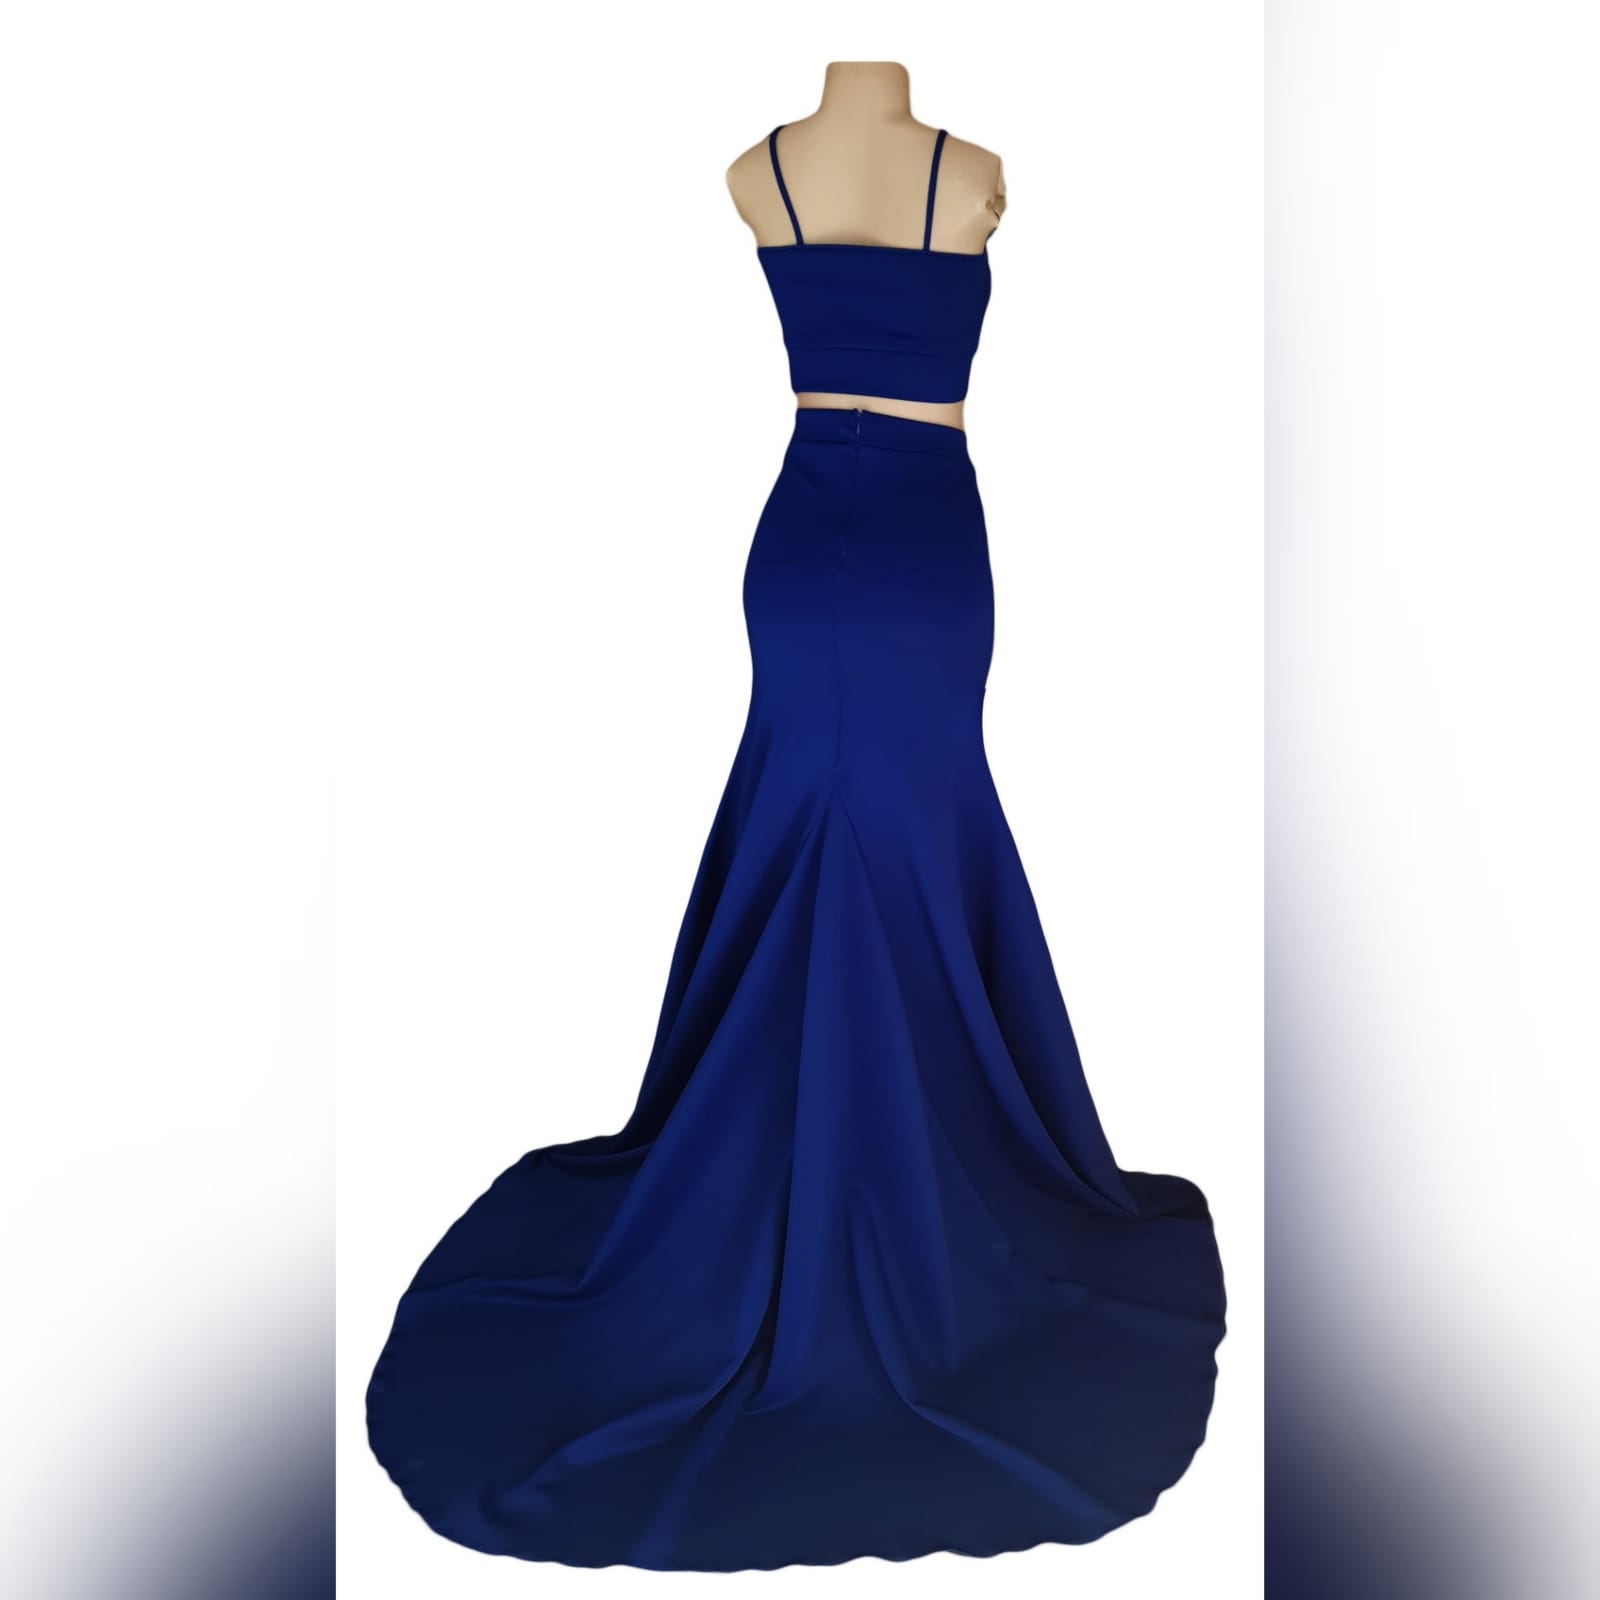 2 piece royal blue prom dress 3 2 piece royal blue prom dress. Crop top with cleavage opening. Fitted skirt with a slit and a train.